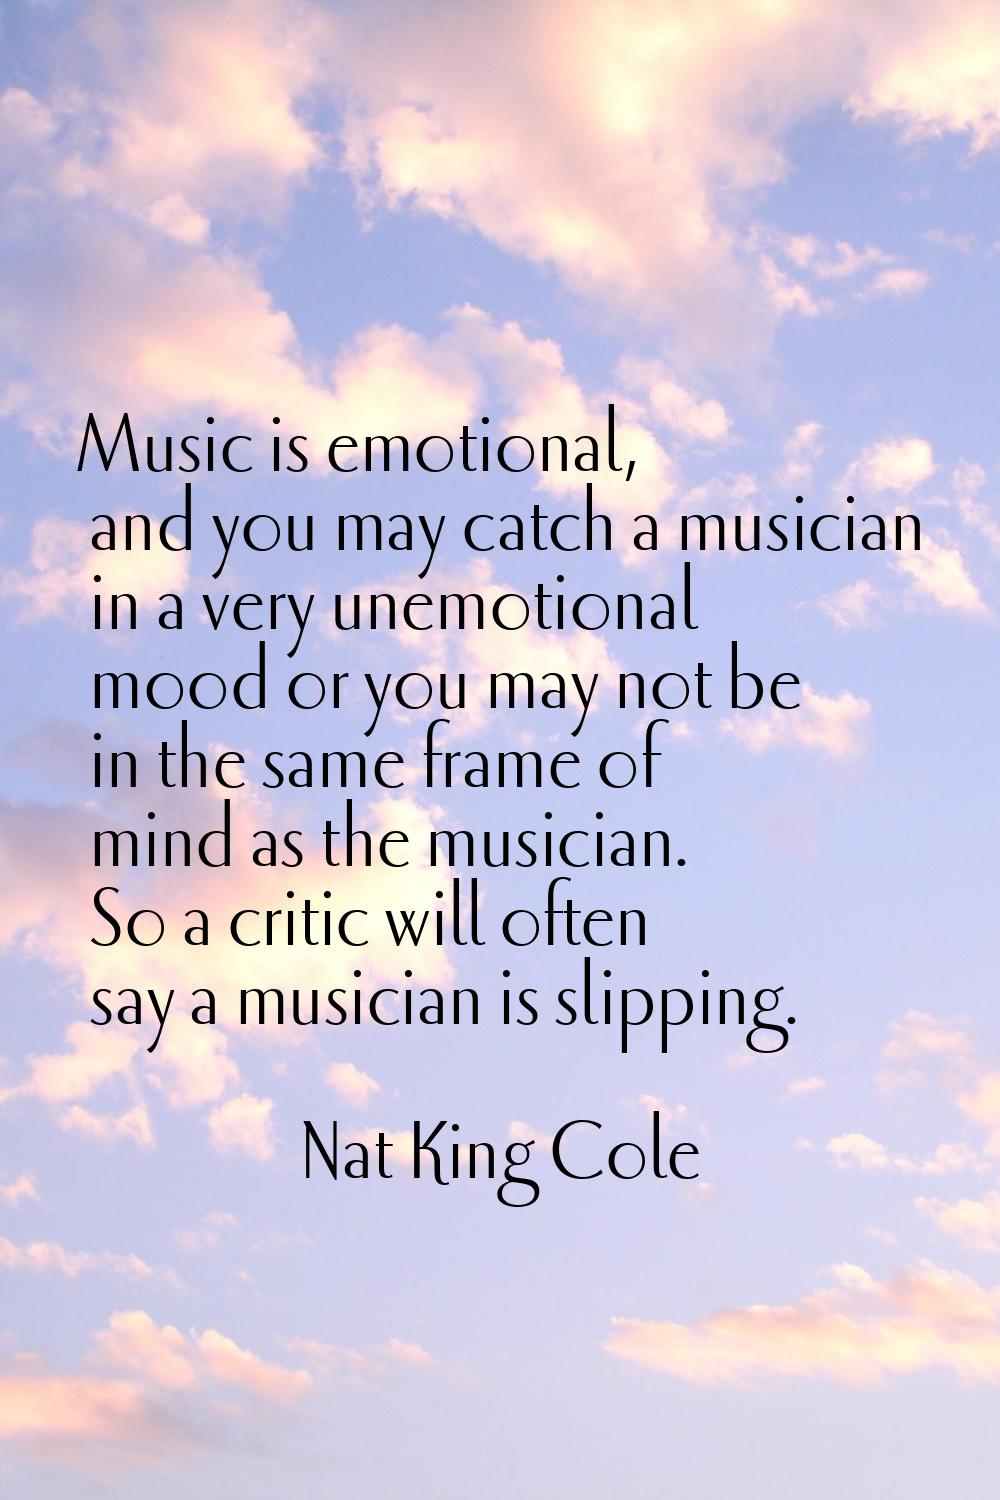 Music is emotional, and you may catch a musician in a very unemotional mood or you may not be in th